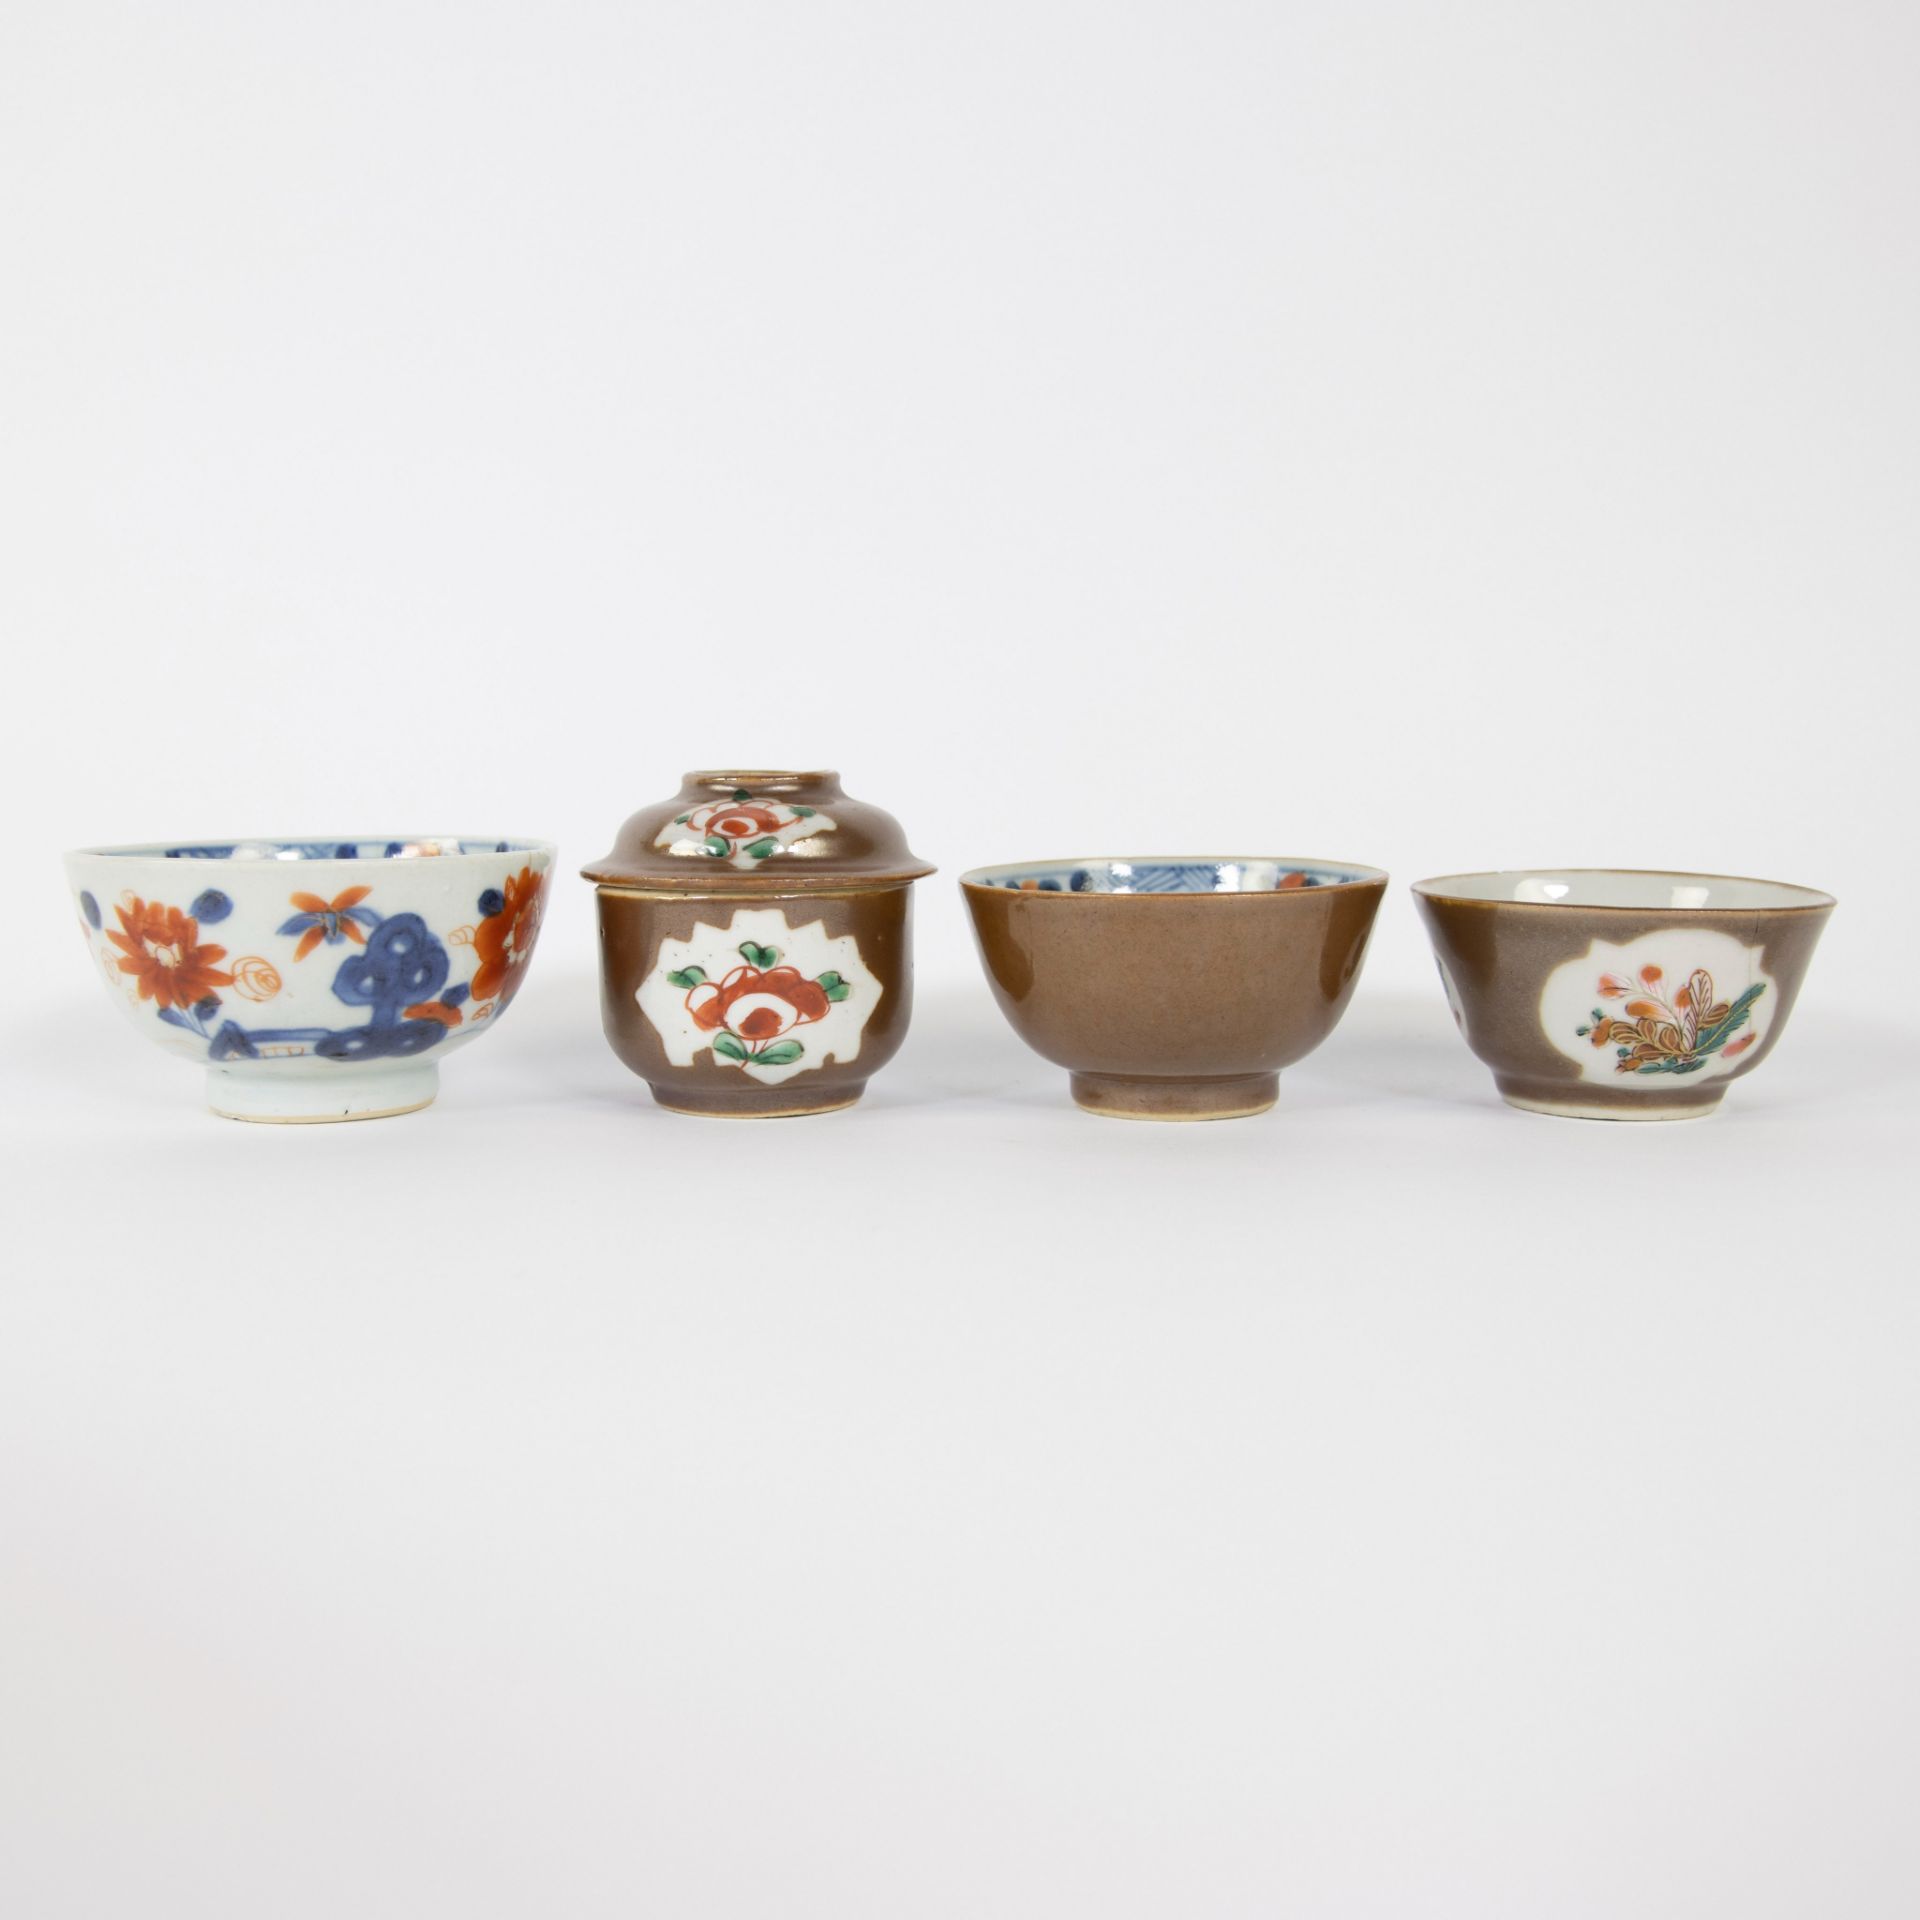 A set of Chinese batavia brown cups and saucers, one Imari cup and 2 plates blue/white, 18th C. - Image 4 of 11